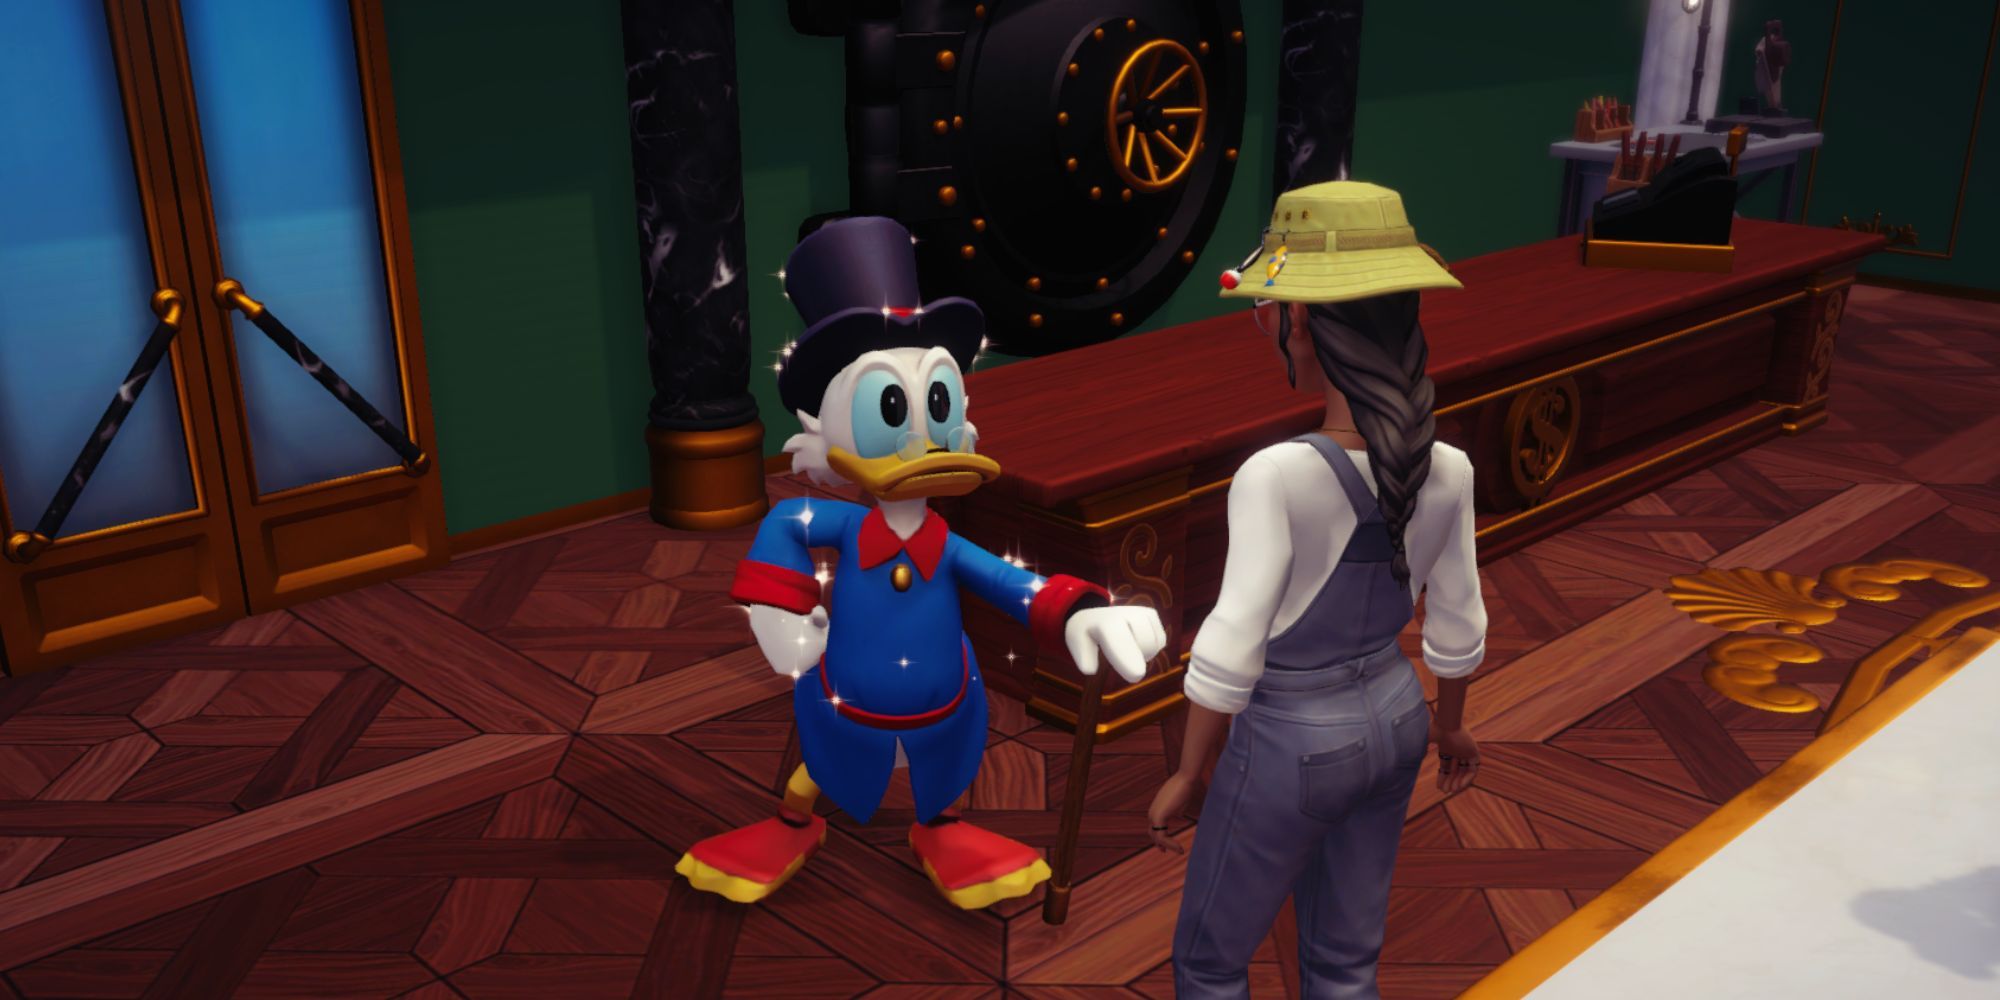 Disney Dreamlight Valley Scrooge McDuck and the protagonist.